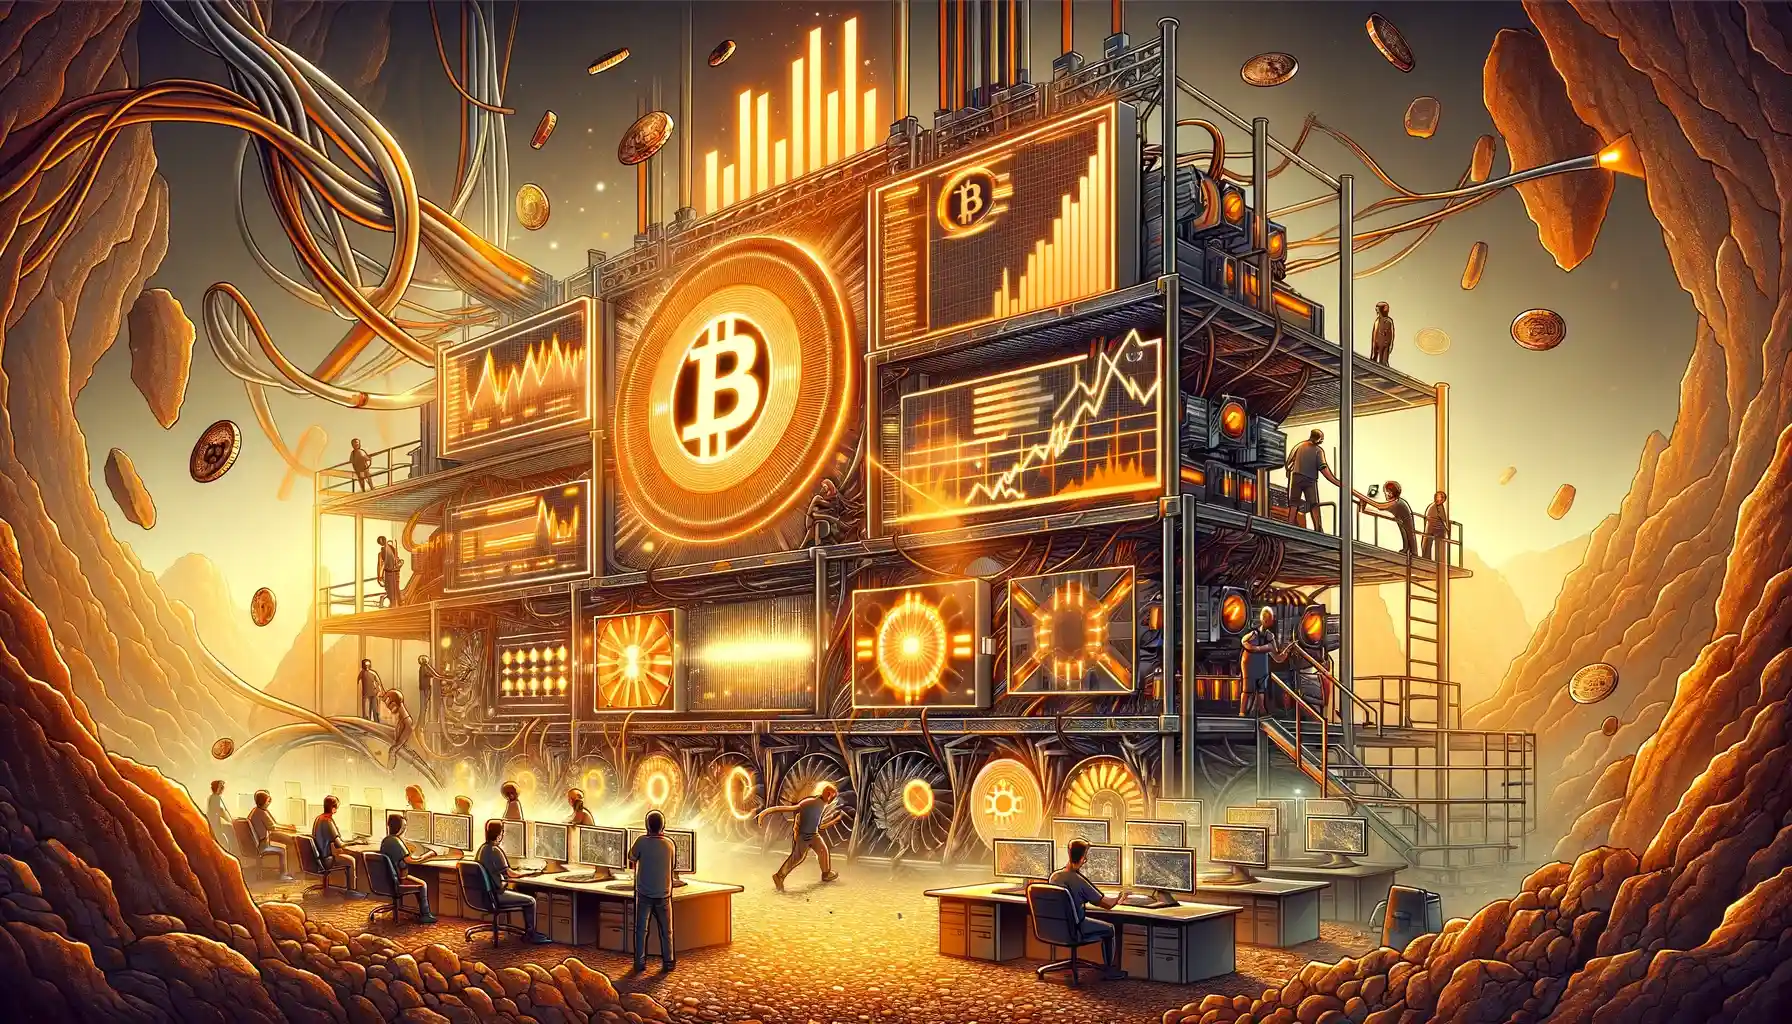 Bitcoin miners’ $69 million payout: Boom before April halving?